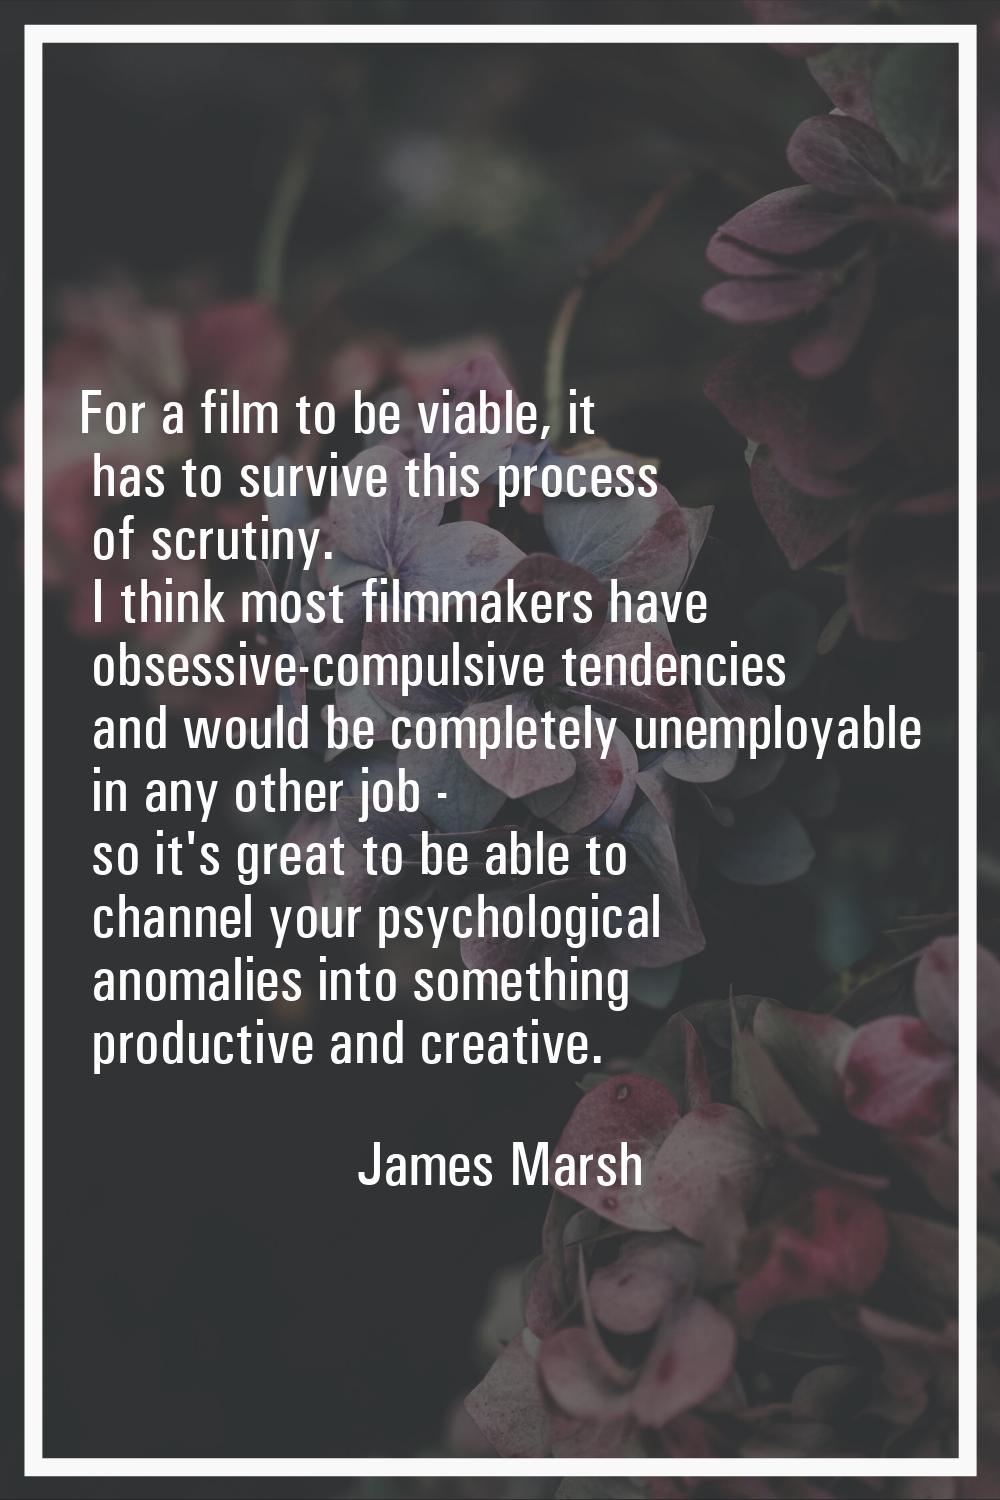 For a film to be viable, it has to survive this process of scrutiny. I think most filmmakers have o